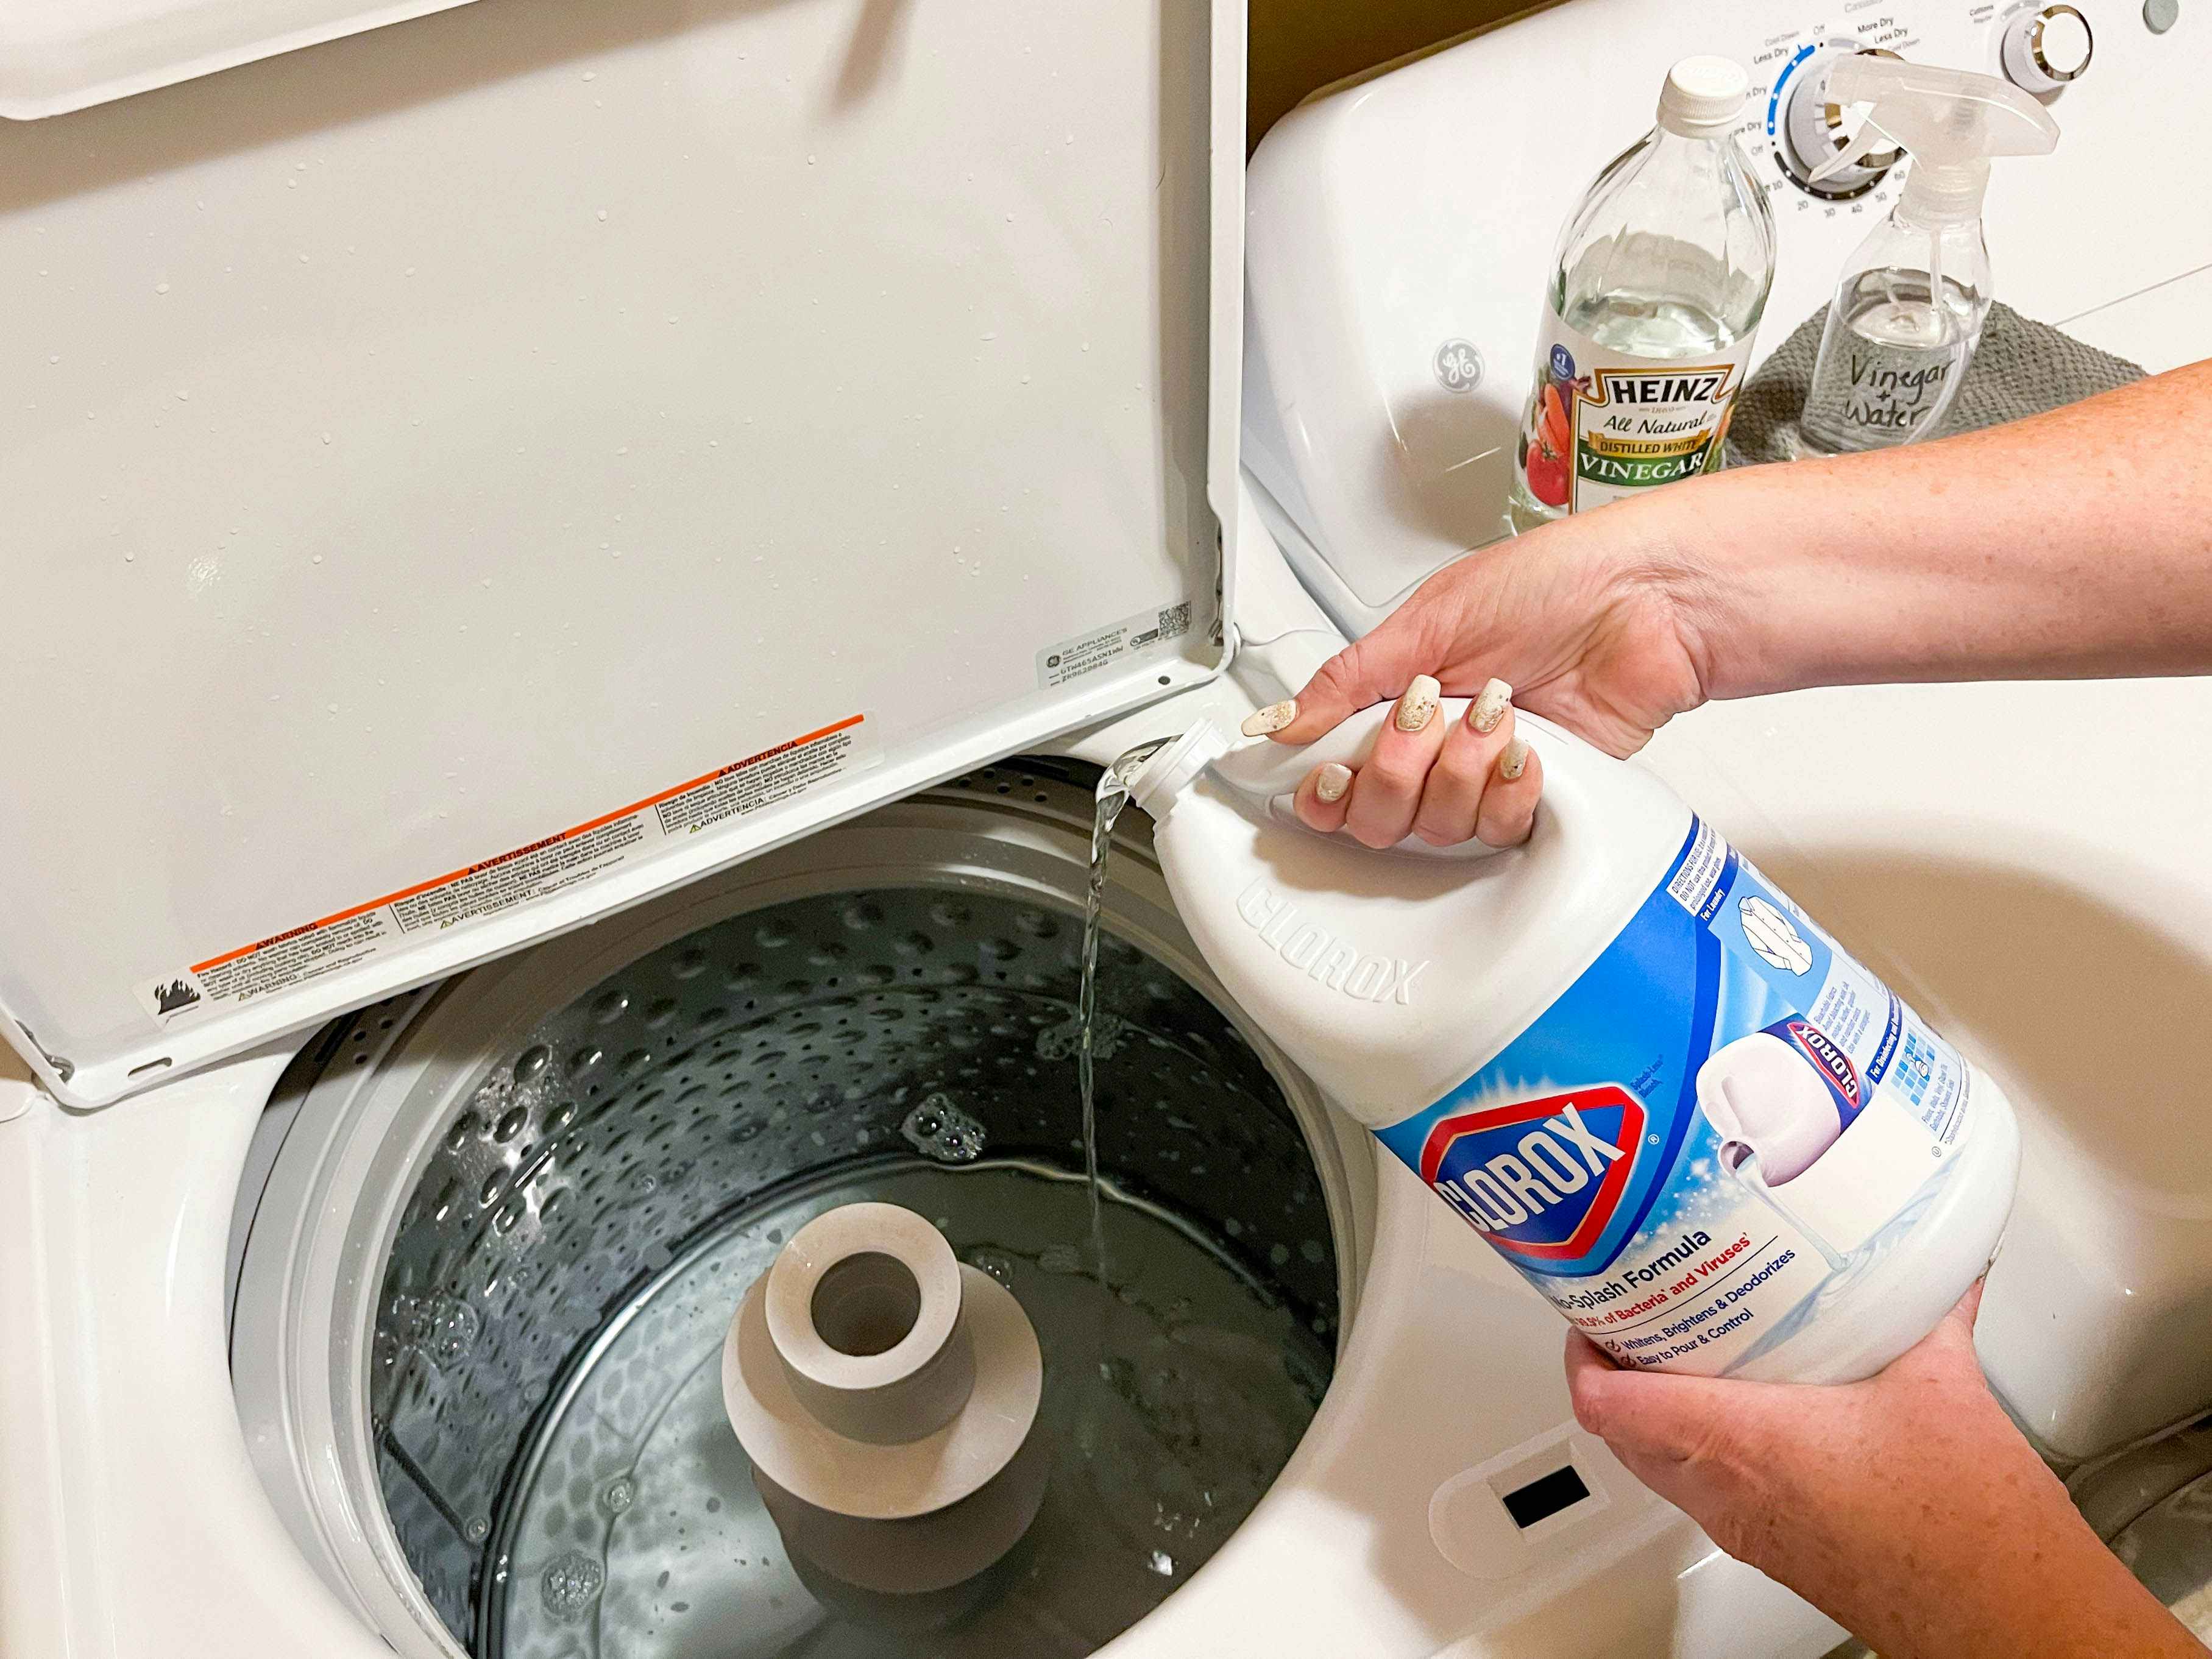 16 Laundry Hacks That Make Wash Day So Much Easier